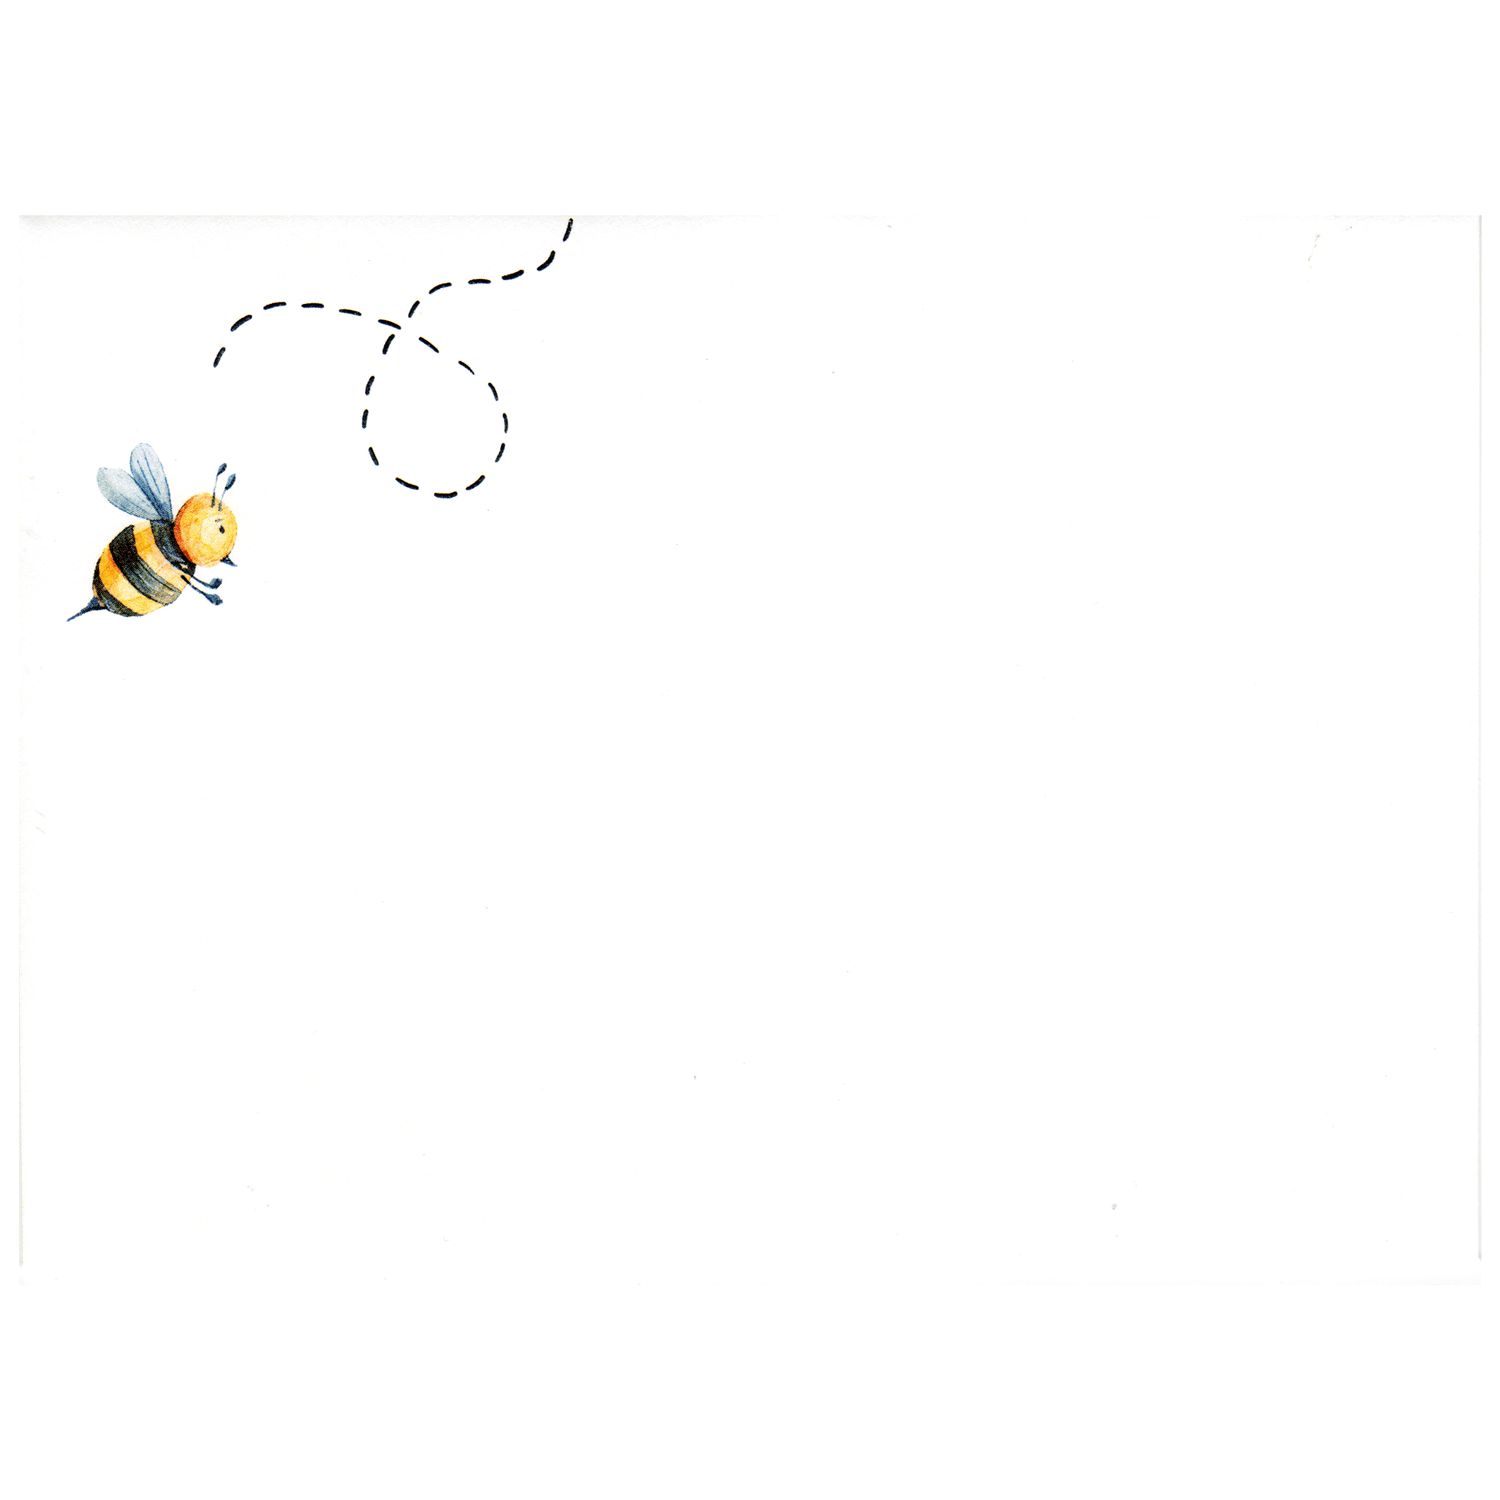 front of envelope showing bumblebee in top left corner with dashed lines showing flight